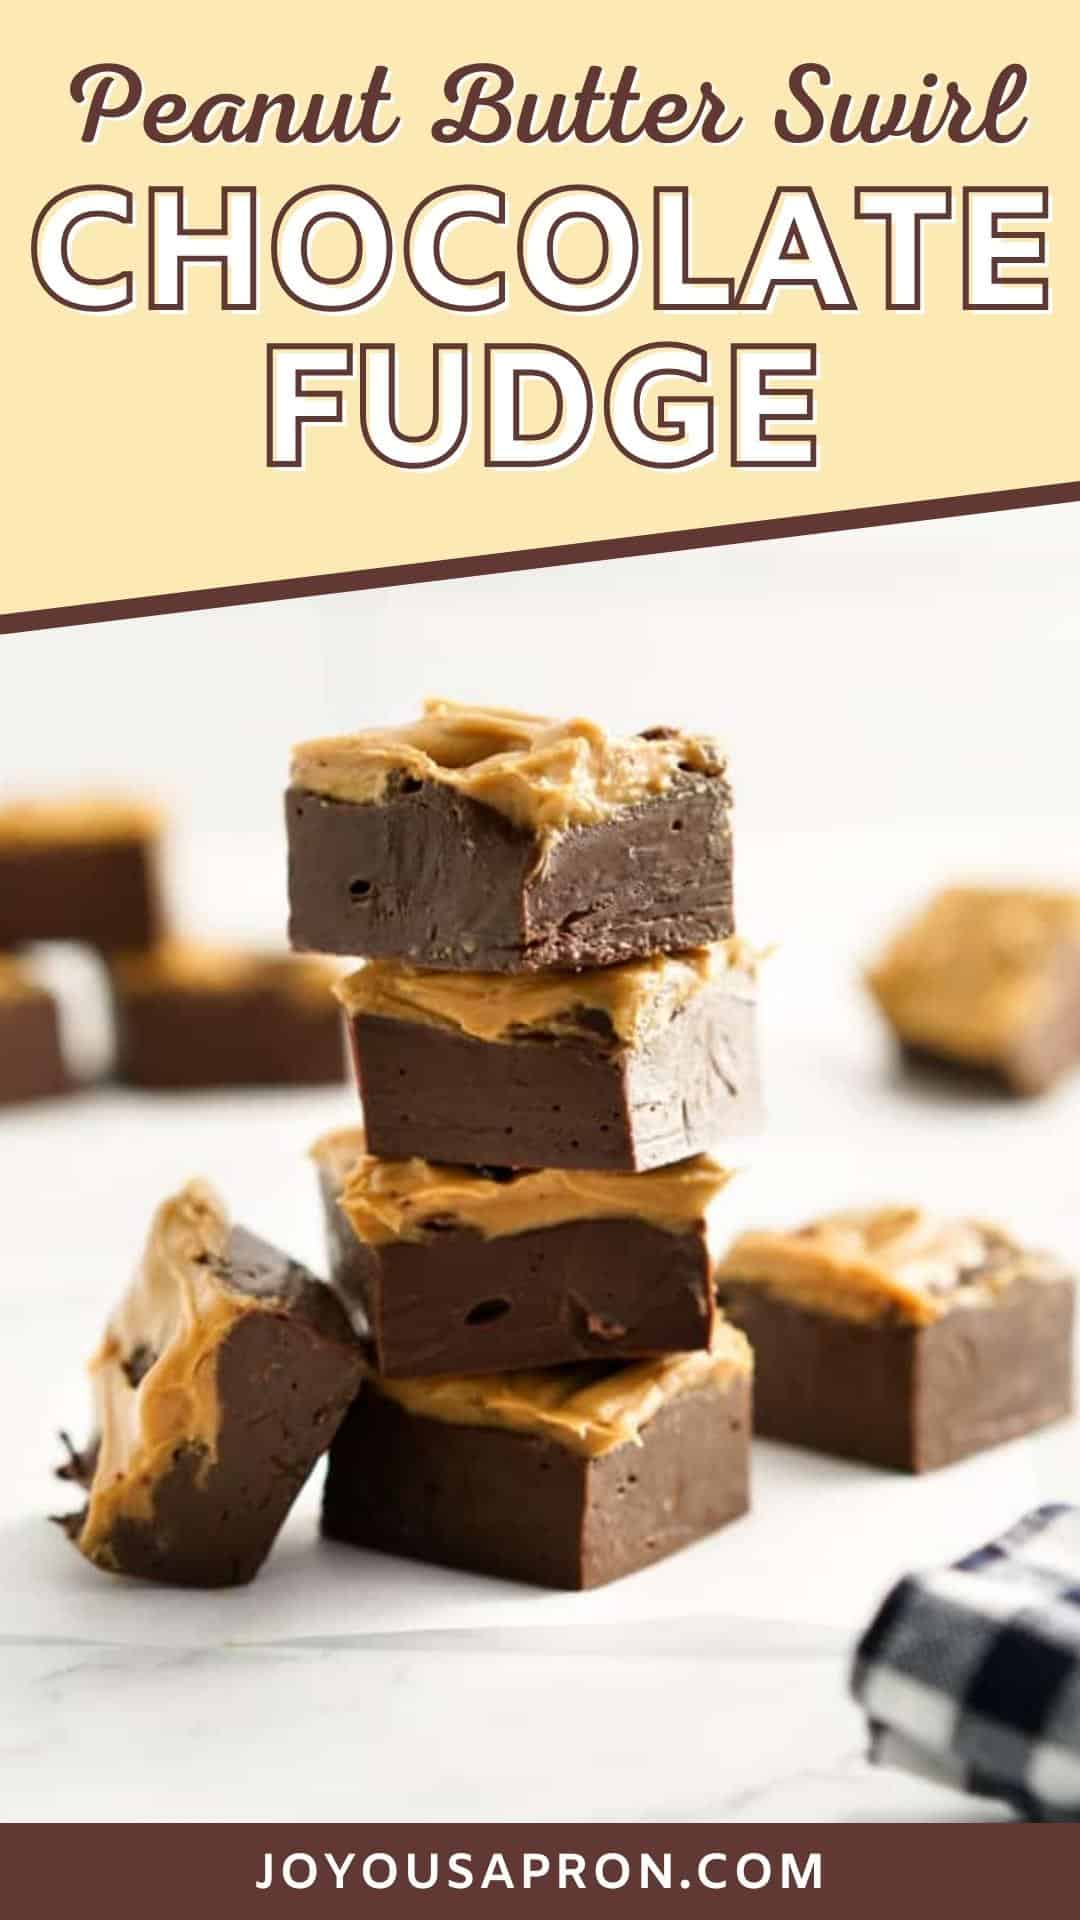 Chocolate Peanut Butter Fudge - A fun Christmas holiday bake! Rich and decadent chocolate fudge topped with peanut butter swirls. An easy fudge recipe without using candy thermometer and requires only 6 ingredients! via @joyousapron